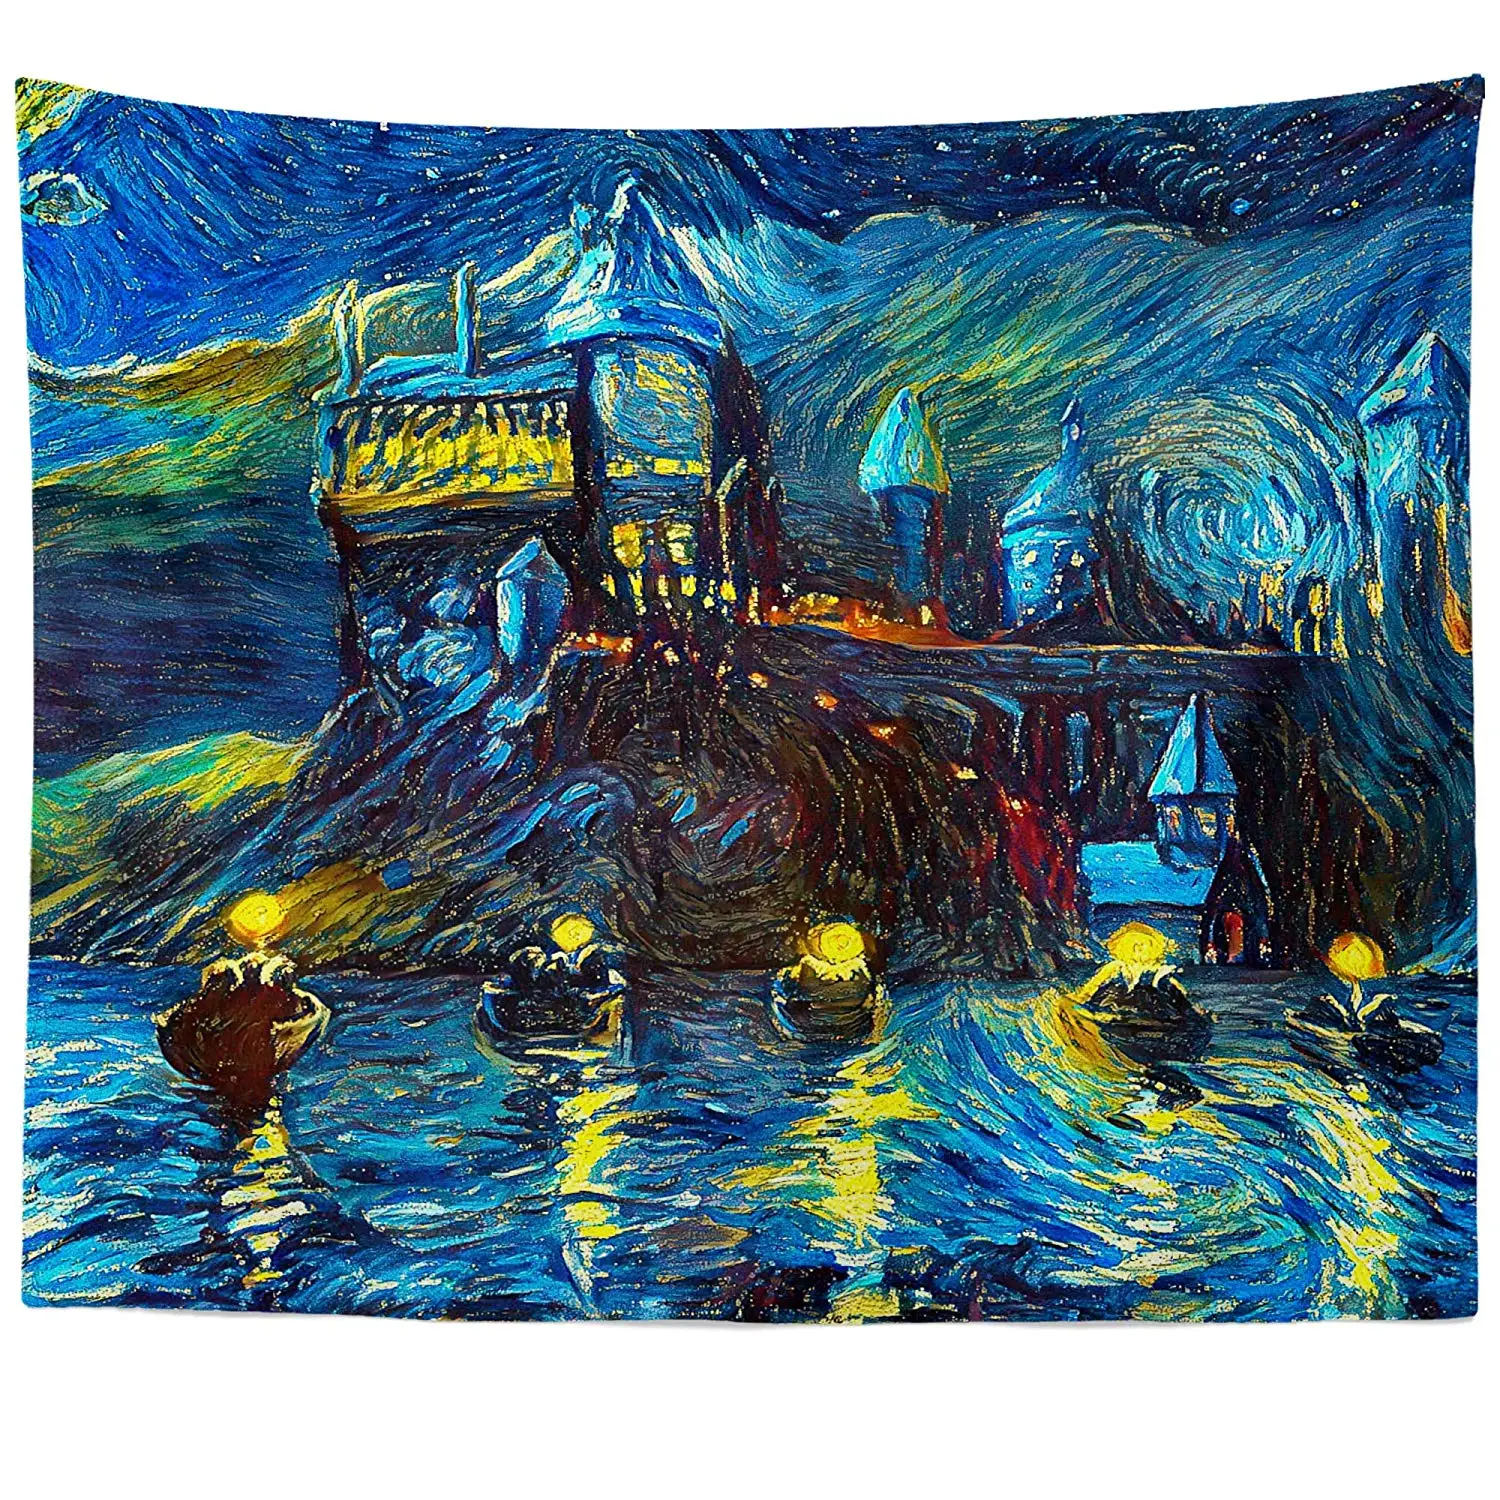 

Starry Night Castle Night Boats Wall Hanging Tapestry Abstract Artwork Home Decor